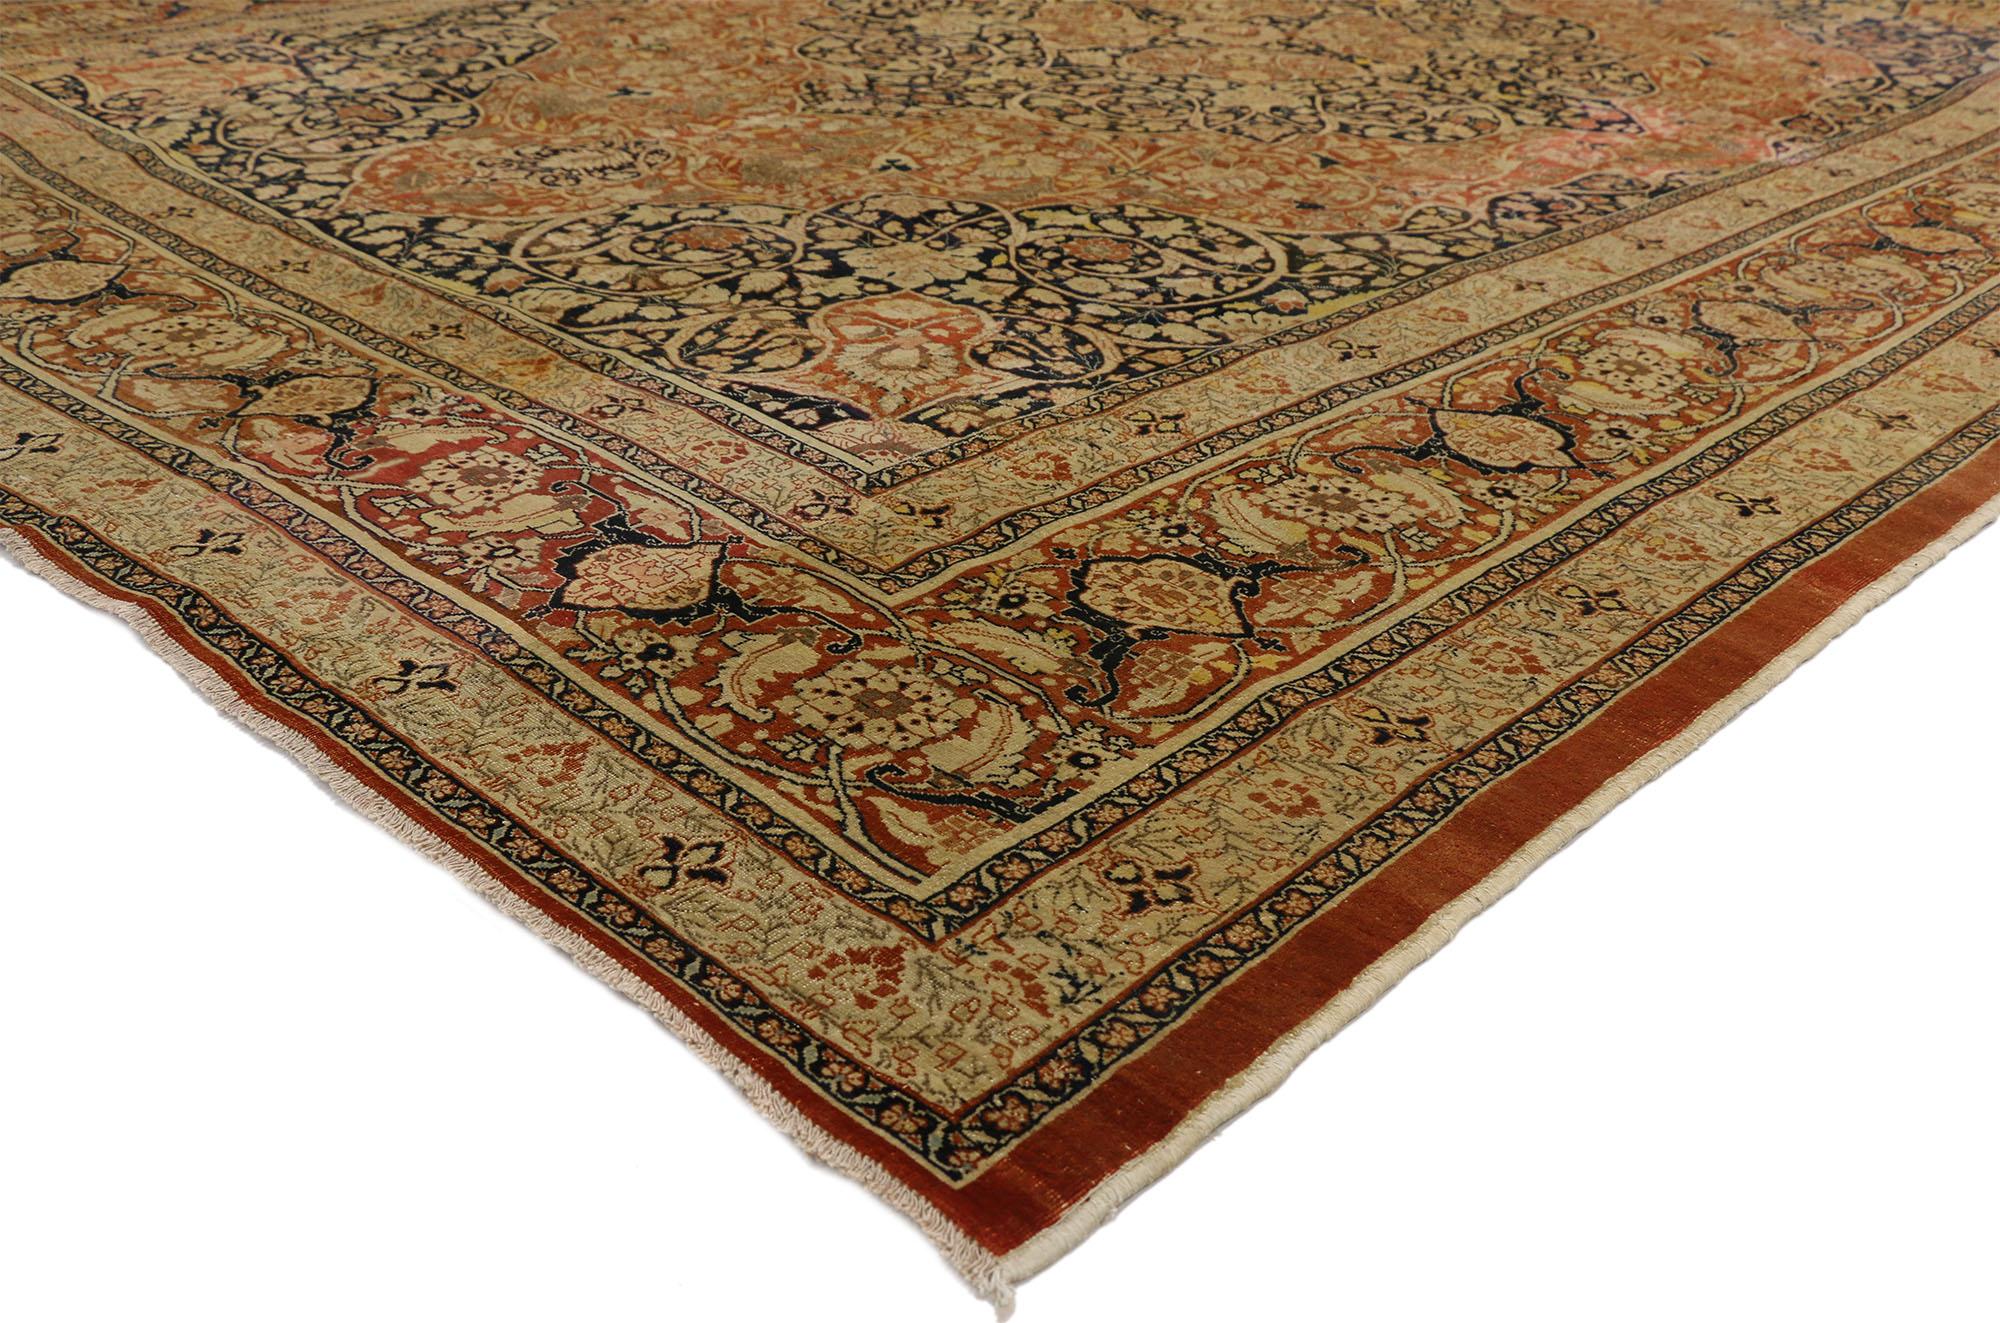 73130 Haji Jalili antique Persian Tabriz rug with Art Nouveau style. This majestic and classically composed Haji Jalili Antique Persian Tabriz Rug with Art Nouveau Style was made in Iran in the late 19th century, circa 1880. It features an ornate